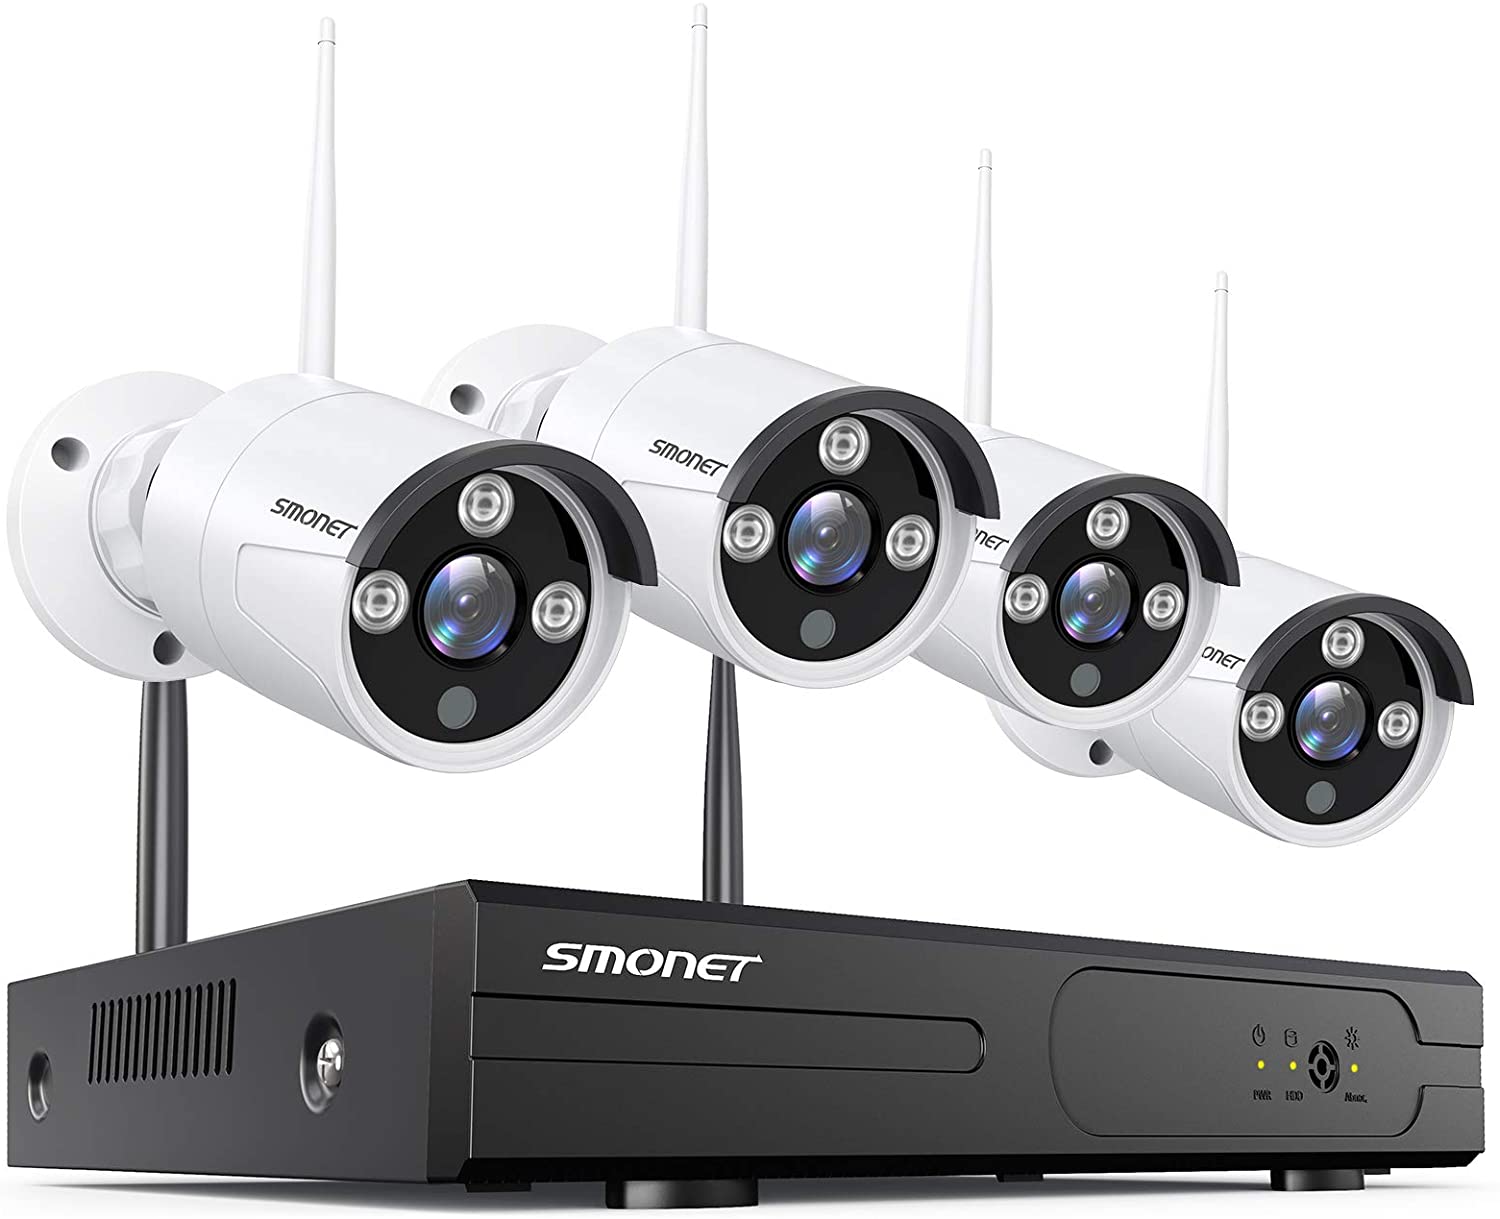 Smonet Wireless Network Video Recorder System 4CH/8CH NVR kits User Manual